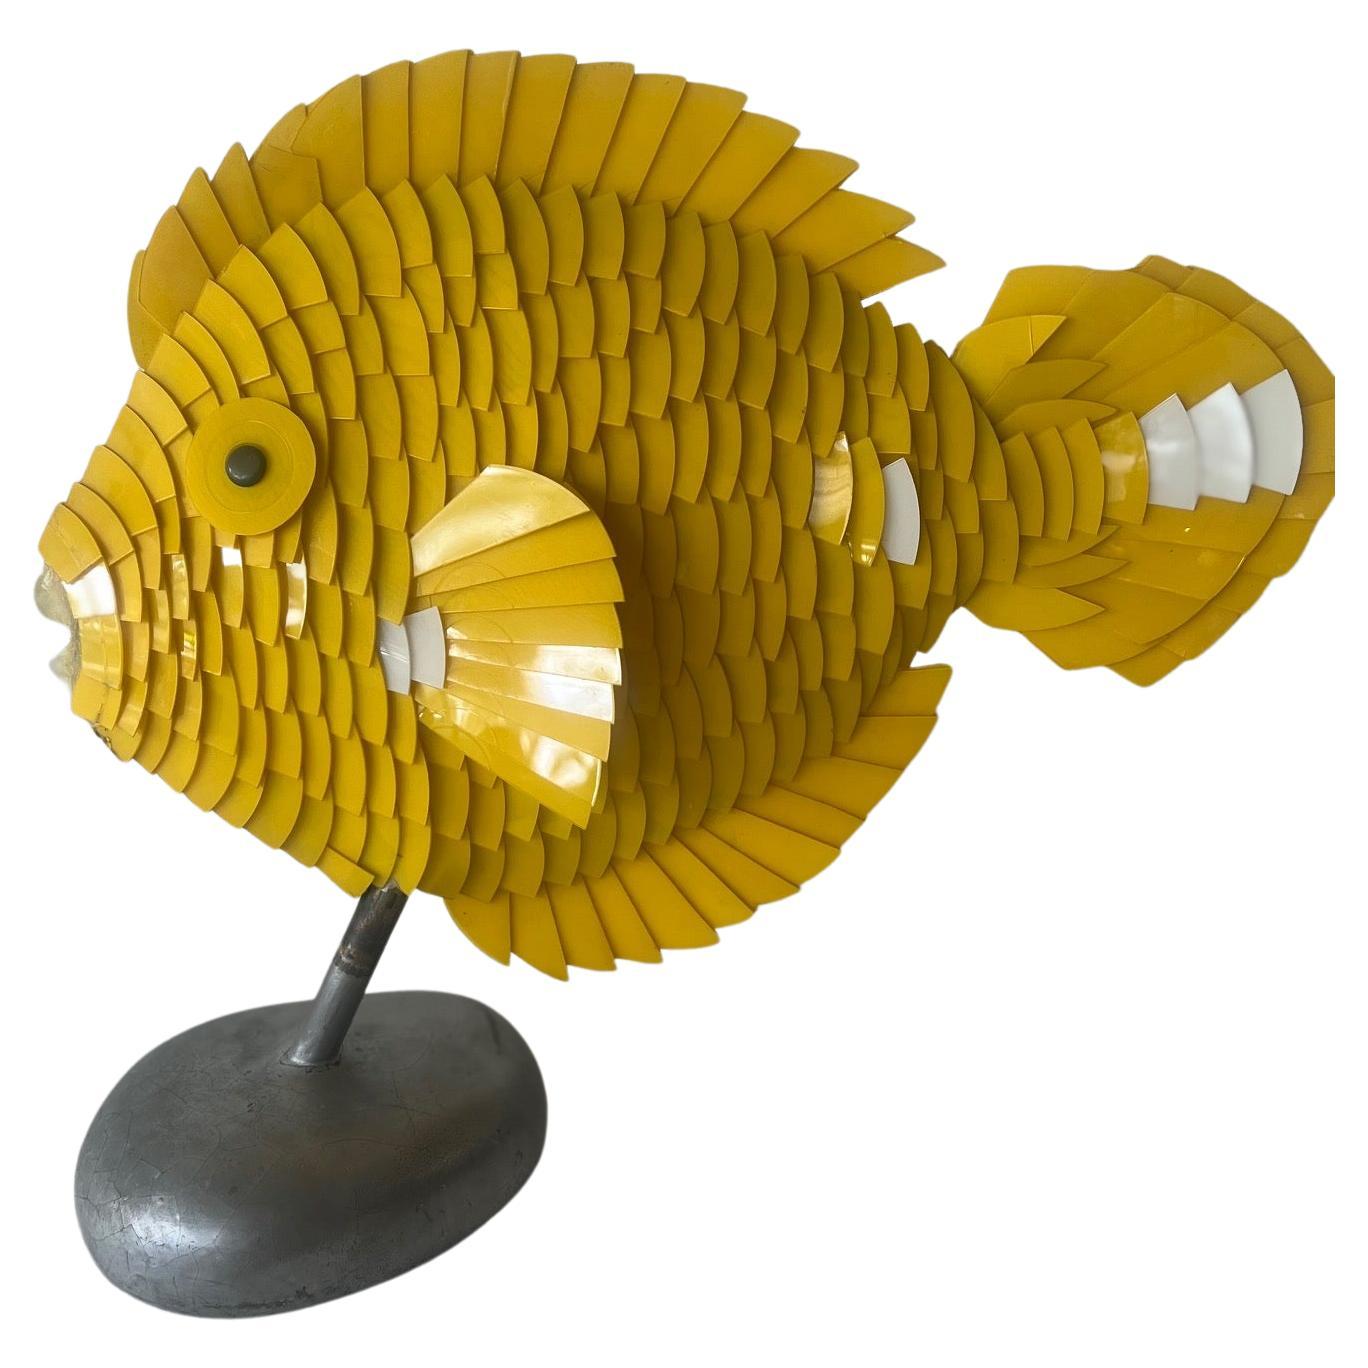 Vintage "The Yellow Fish" Contemporary Sculpture